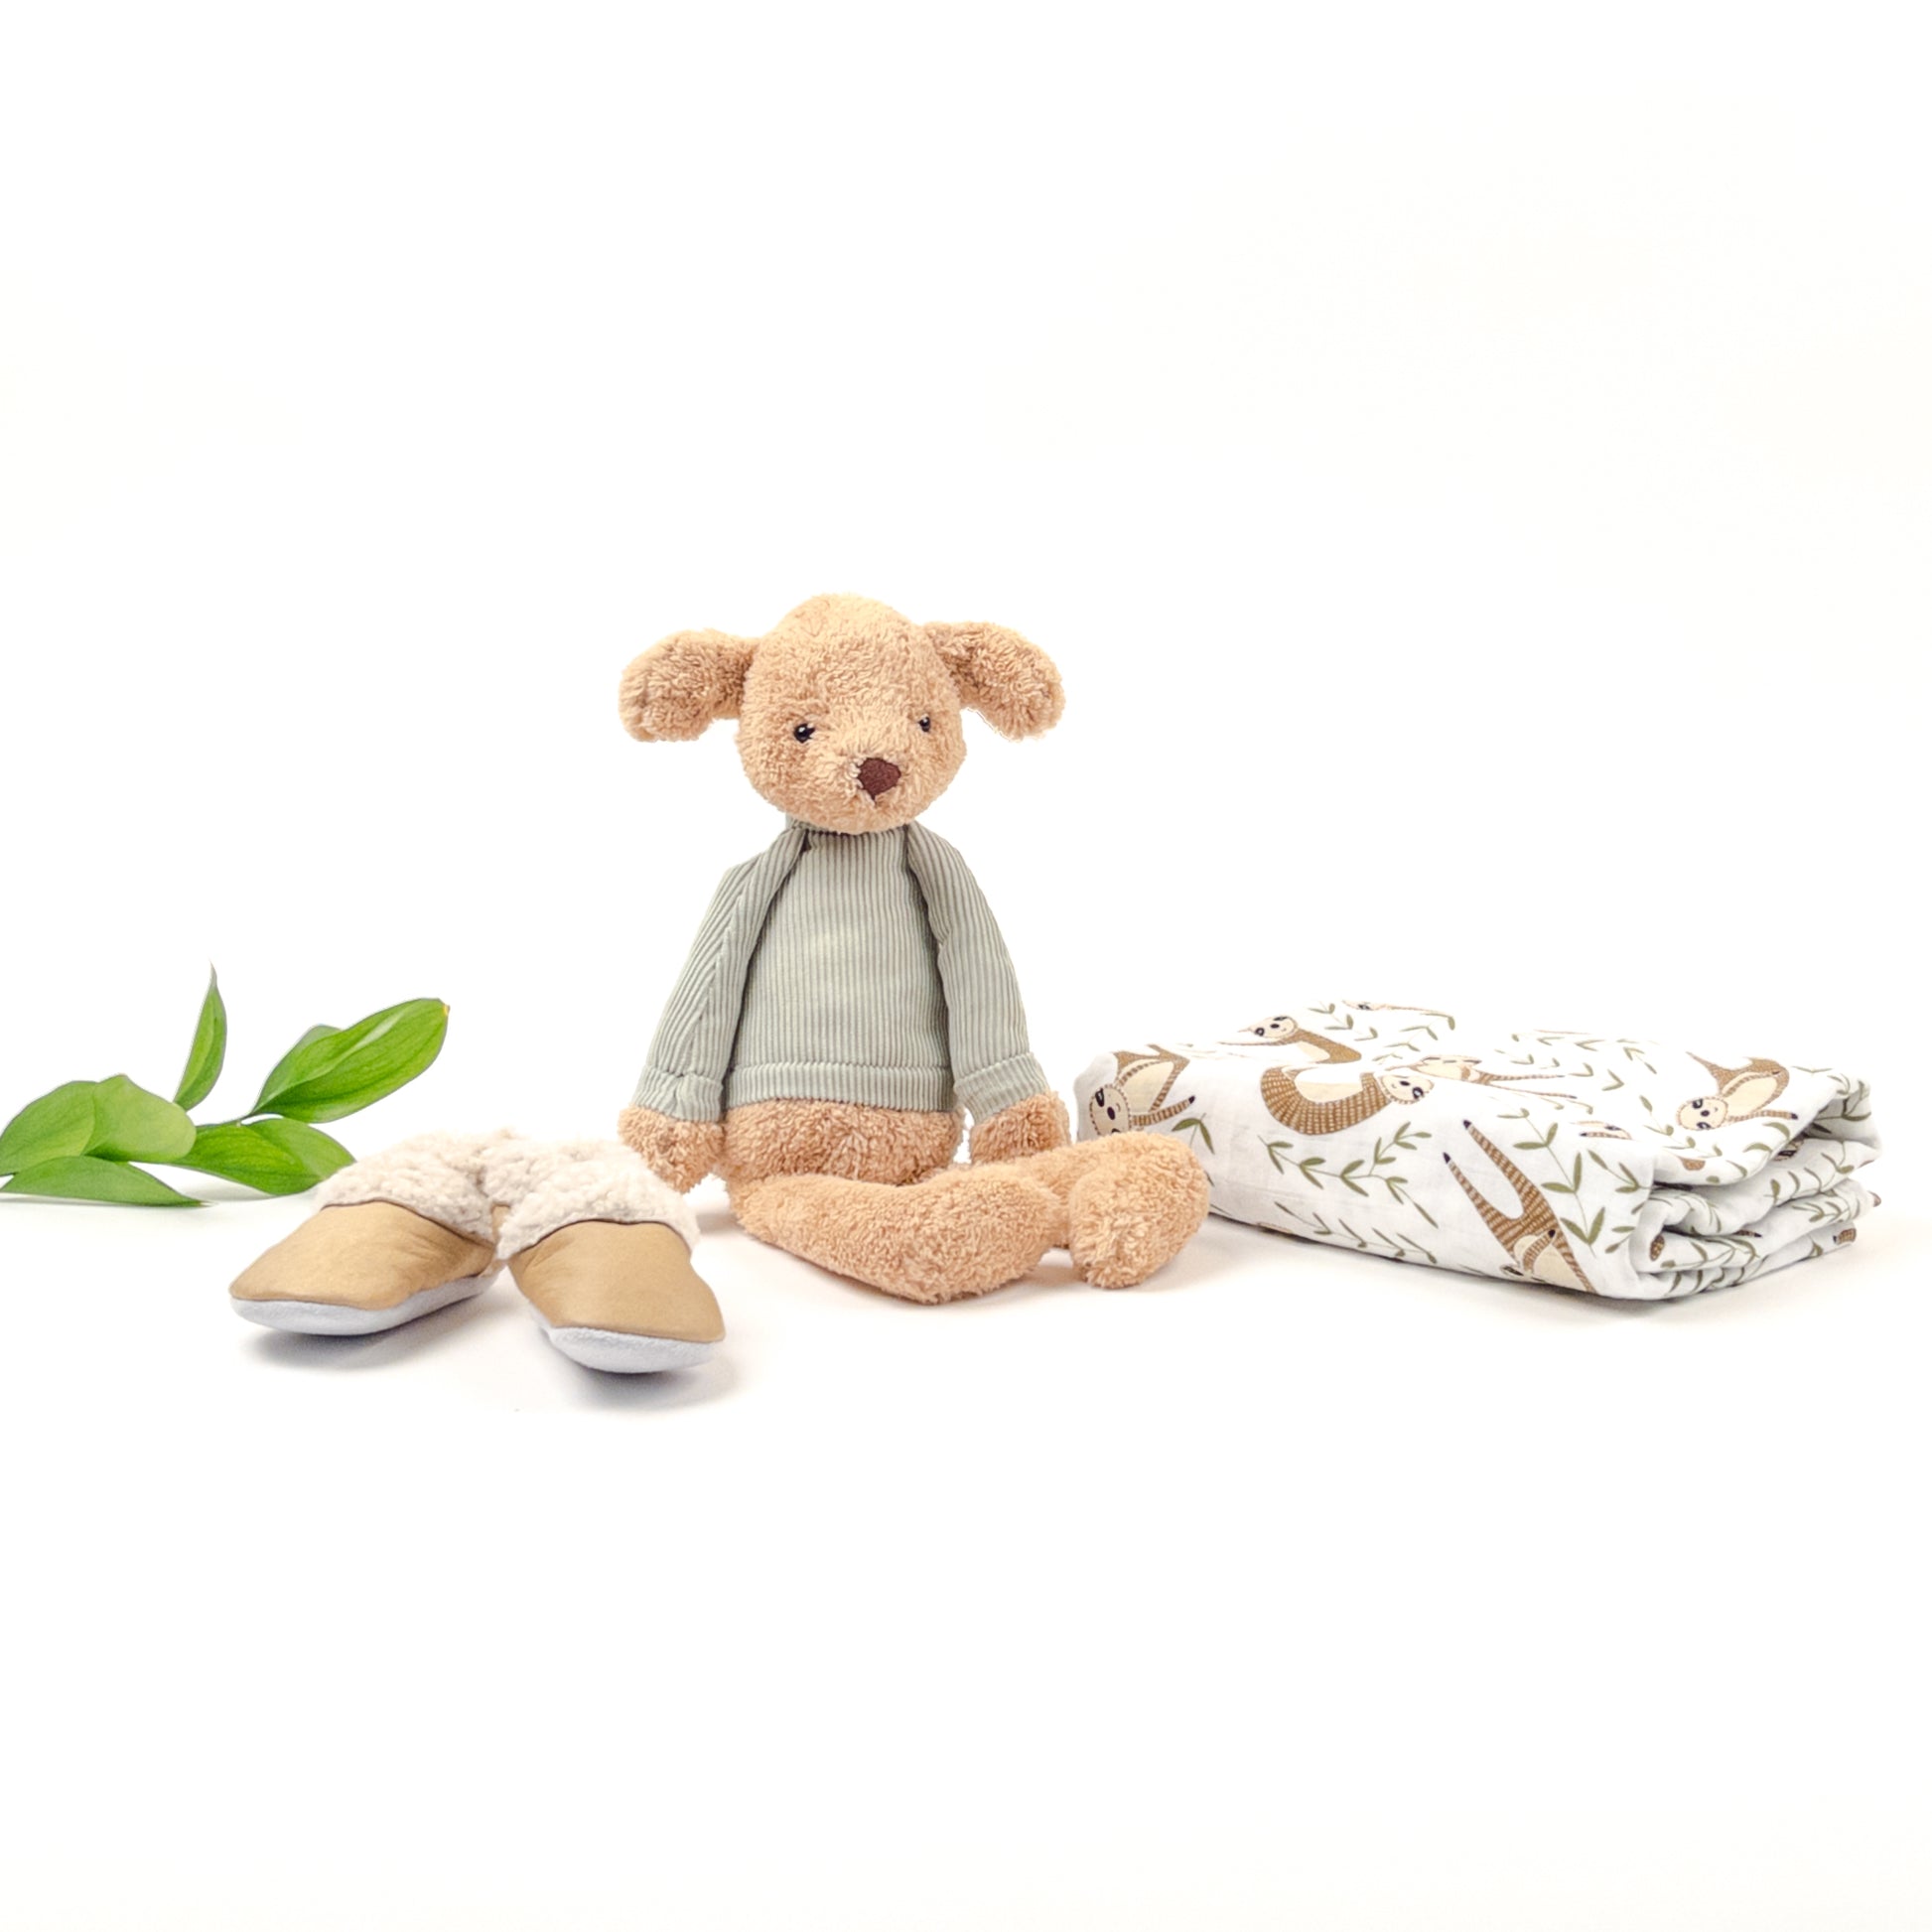 Products shown out of gift box are soft toy, leather shoes, swaddle.